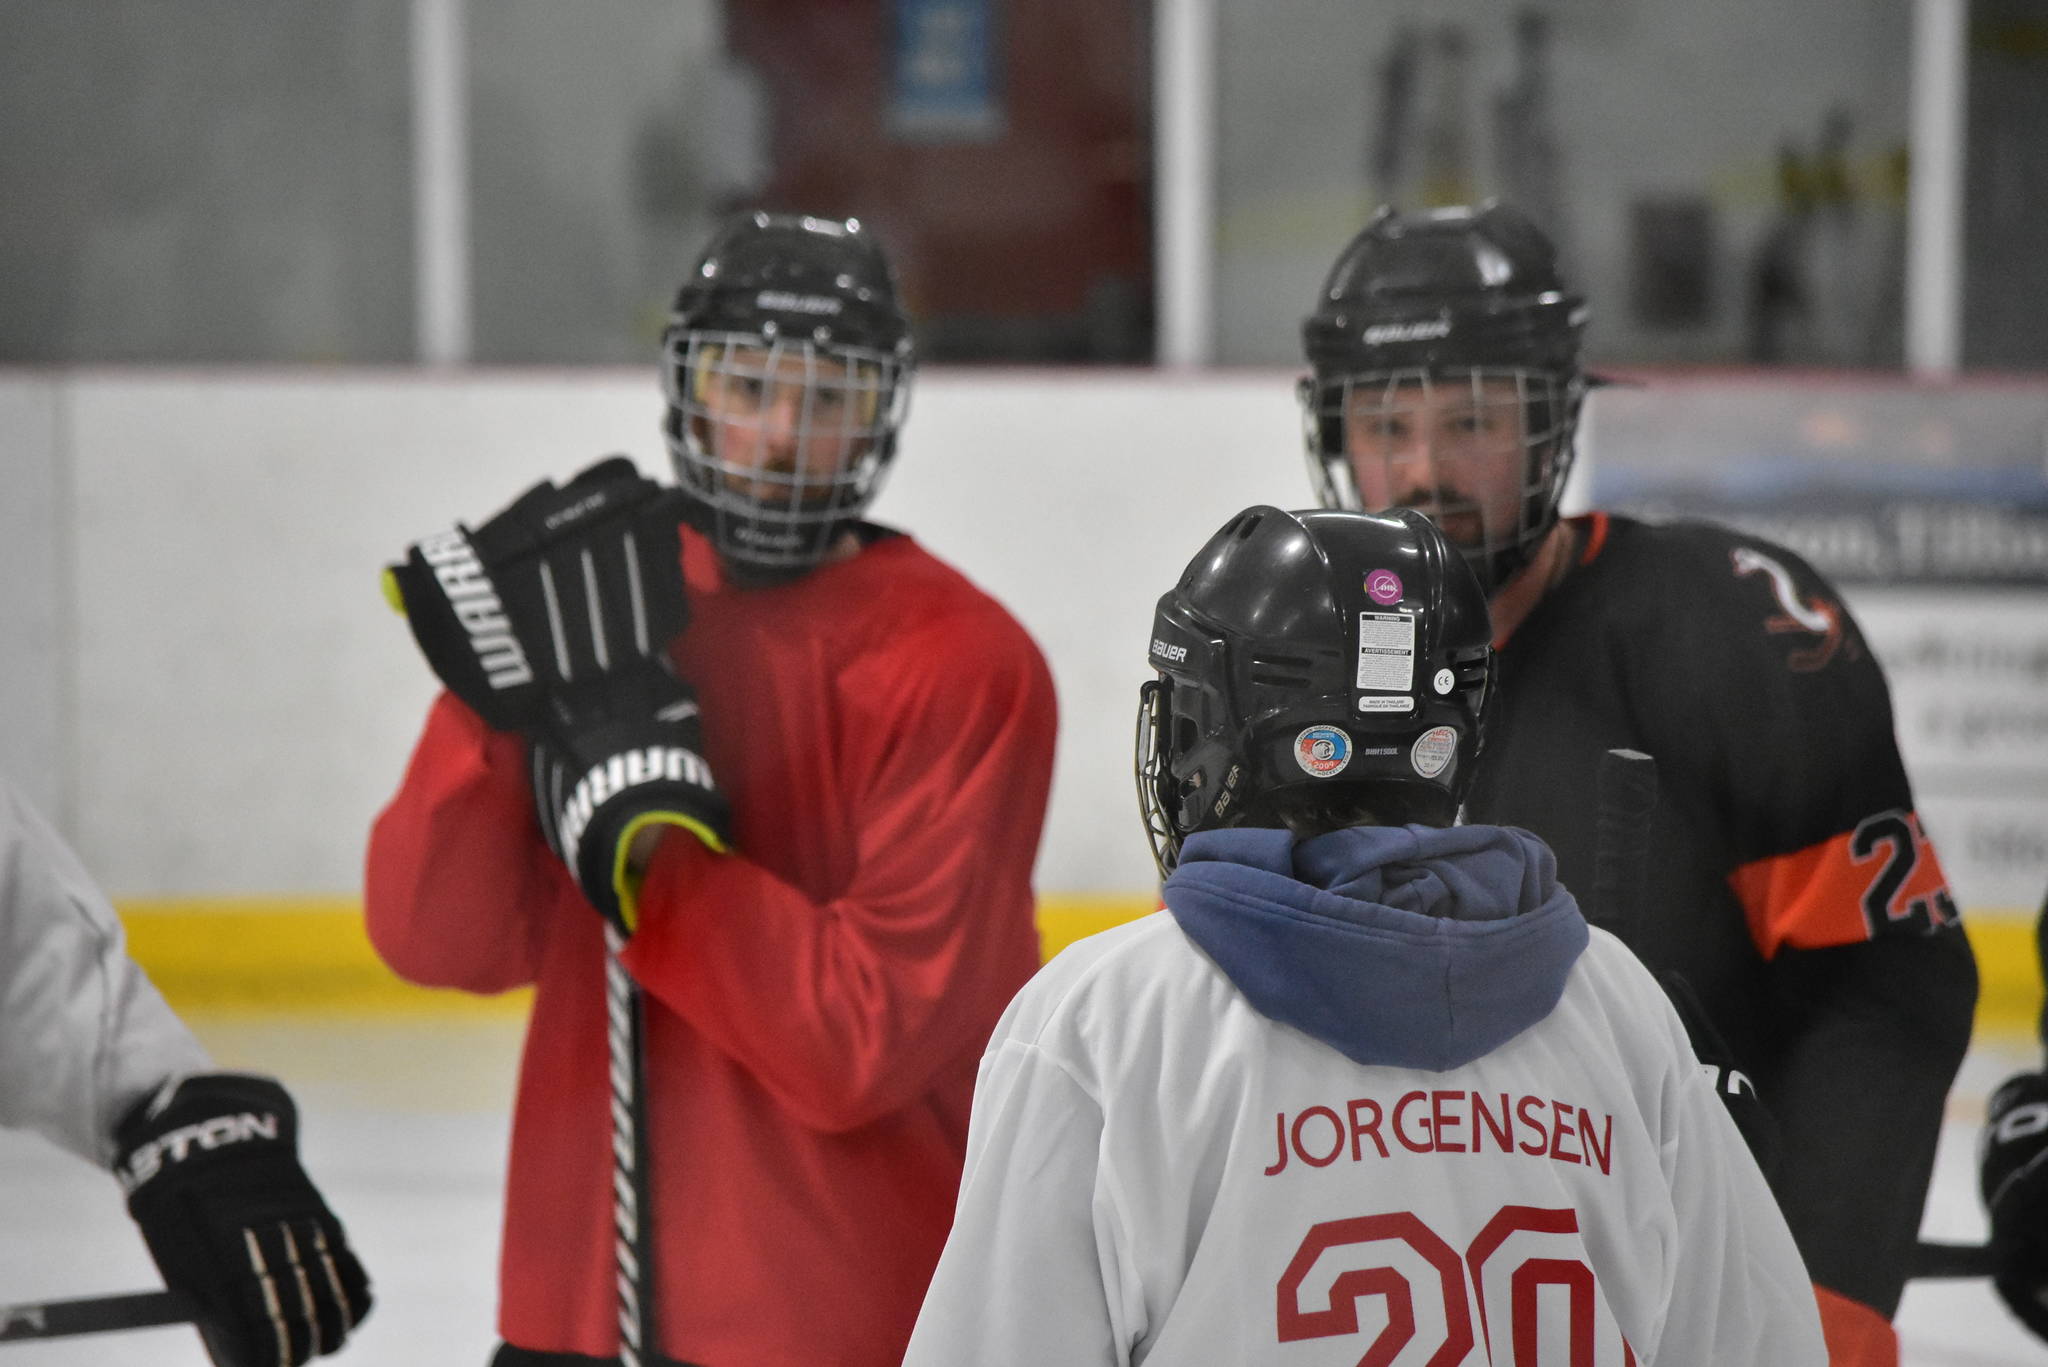 Libertarian presidential candidate Jo Jorgensen speaks with local hockey players at the Treadwell Arena on Tuesday, Sept. 8, 2020. (Peter Segall / Juneau Empire)